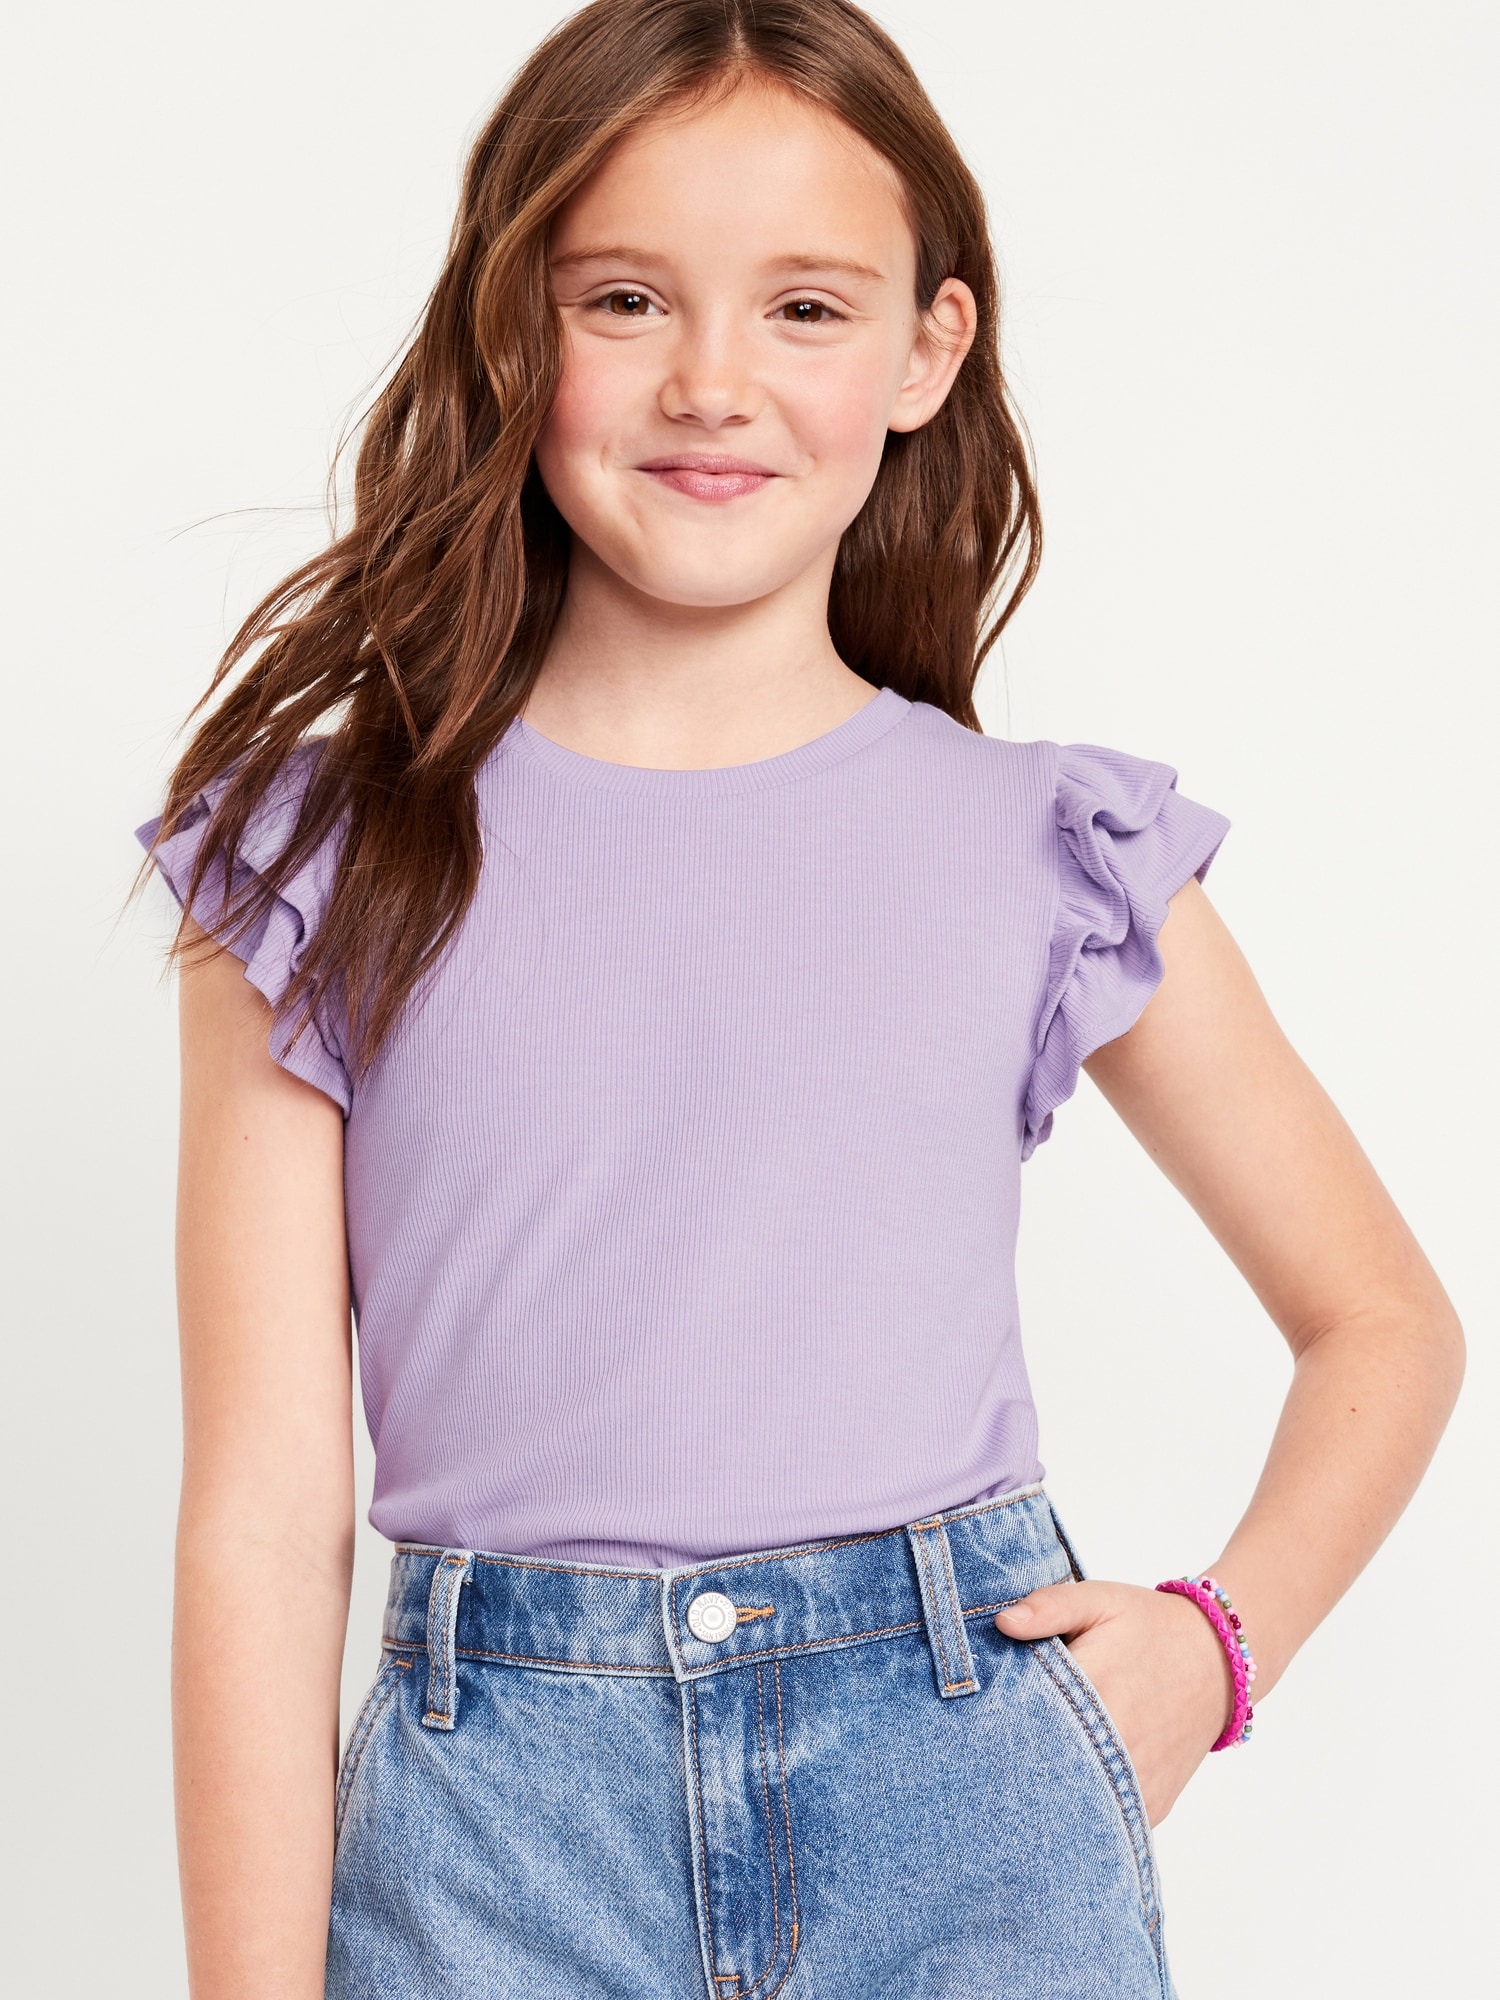 Double-Ruffle Short-Sleeve Top for Girls